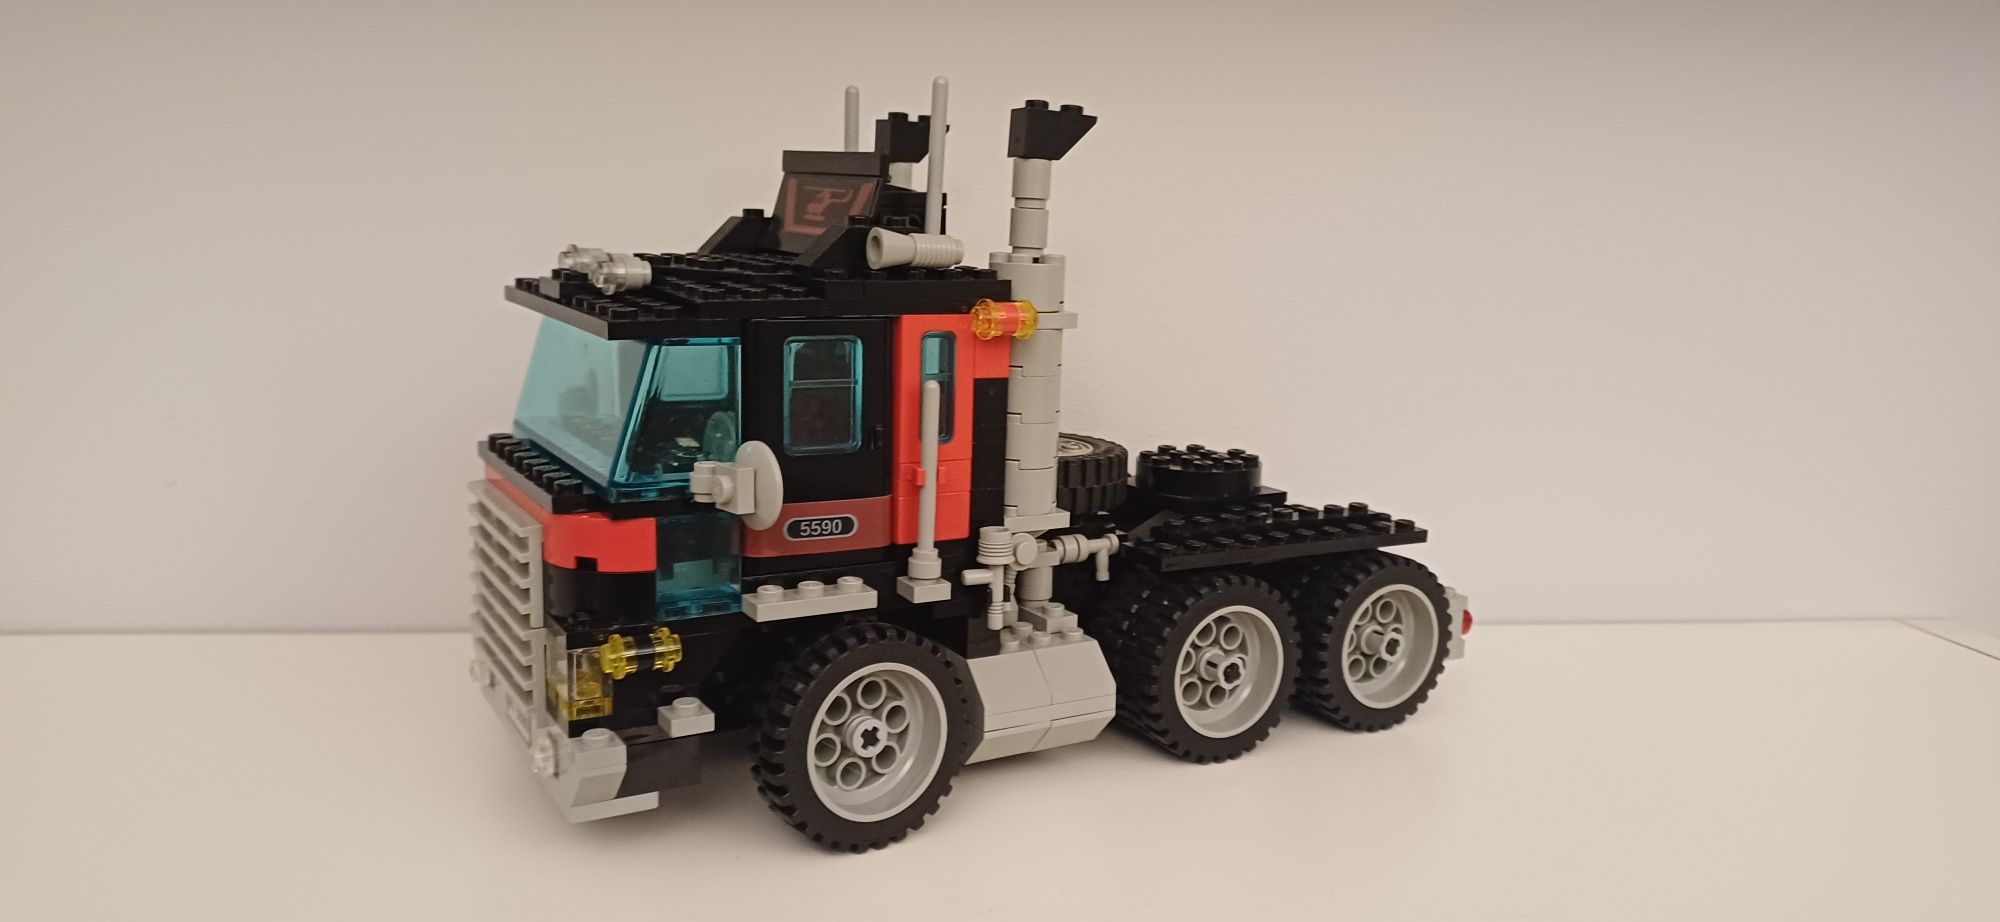 Lego Model Team 5590 - Whirl and Wheel Super Truck